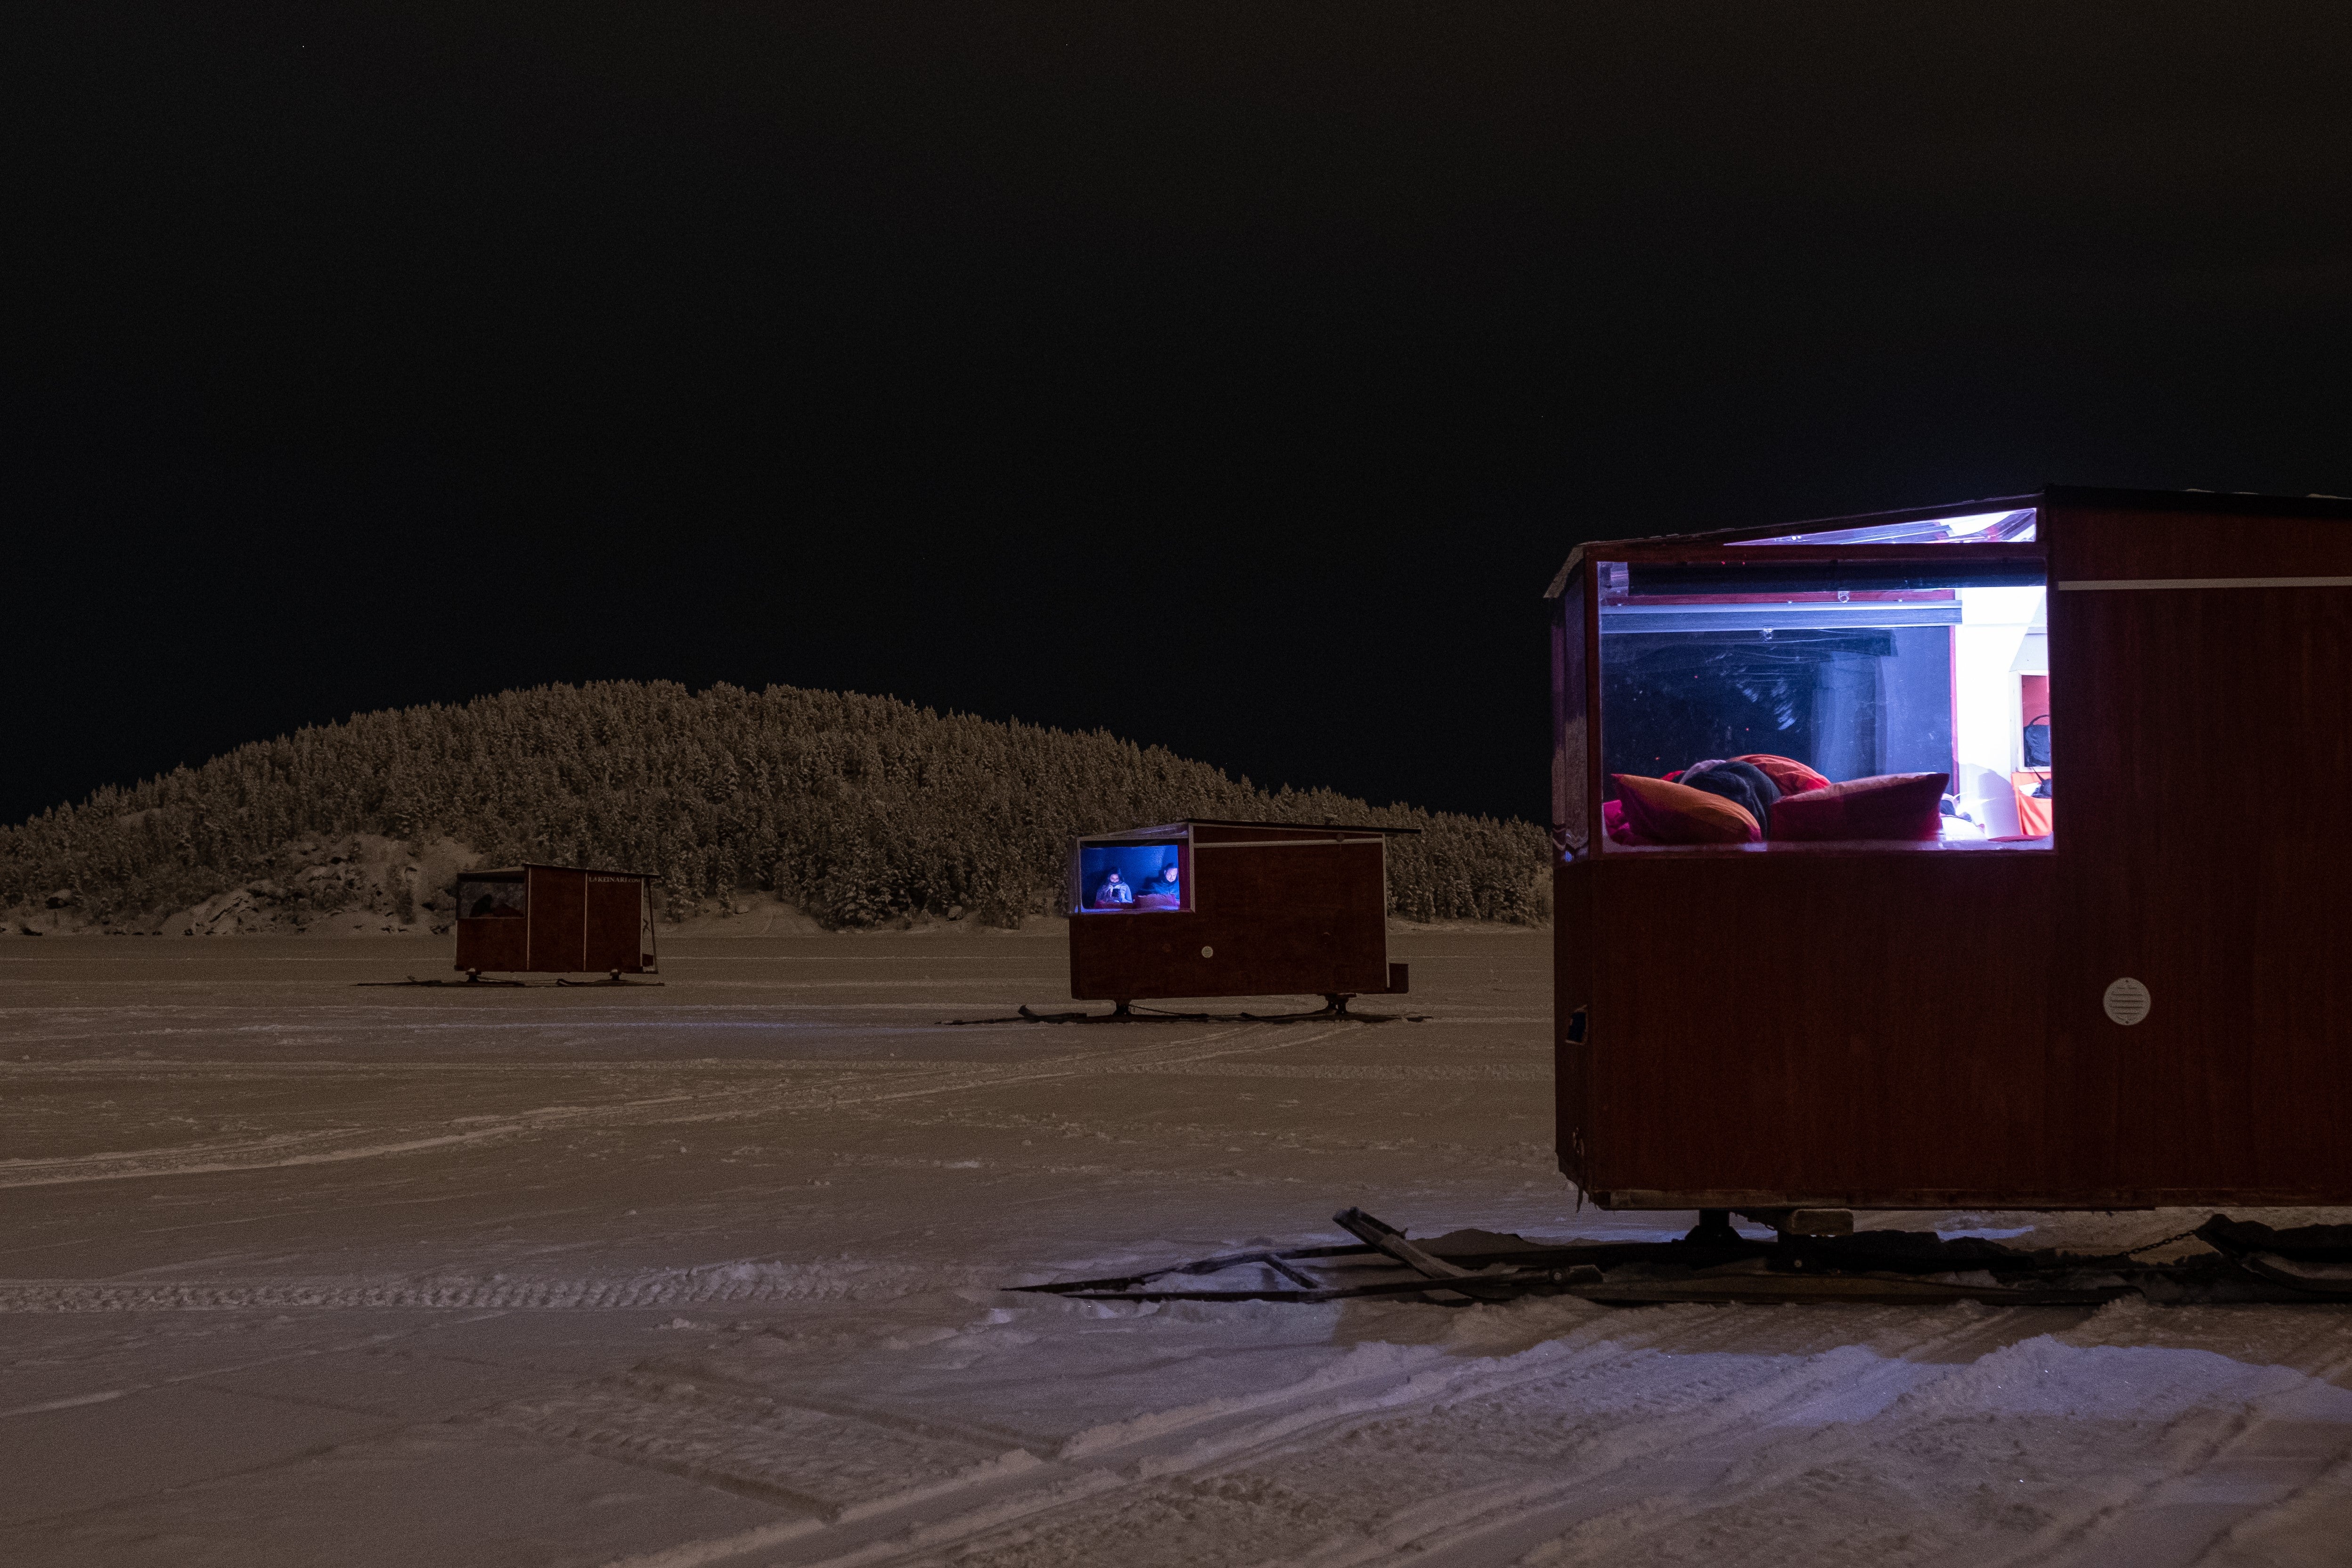 Heated Mobile Cabins offer the chance to sleep on the frozen lake